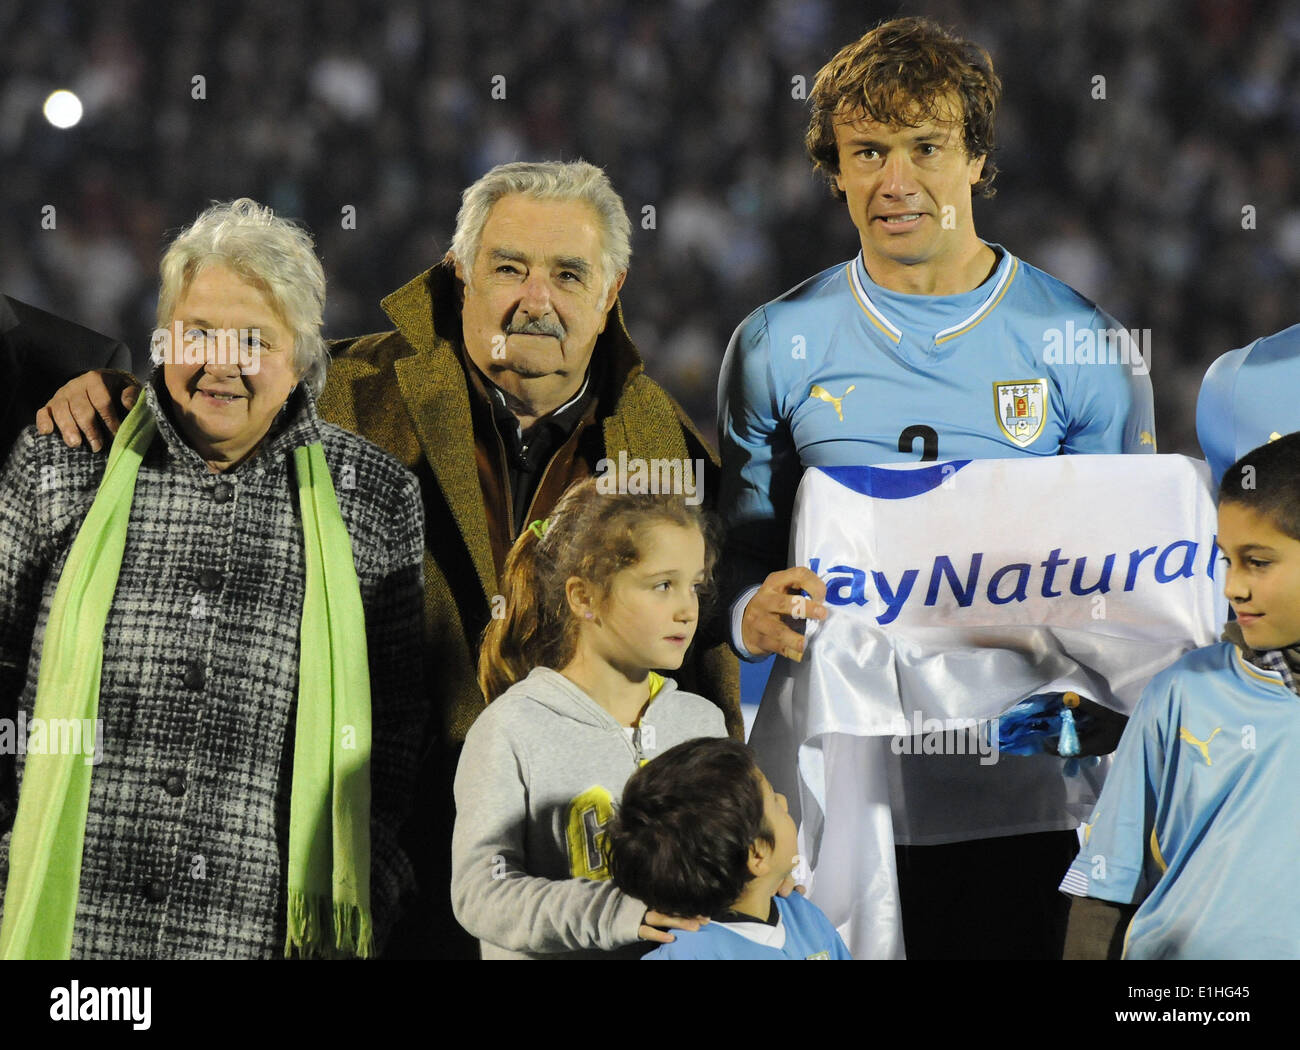 Montevideo, Uruguay. 4th June, 2014. Uruguay's President Jose Mujica (2nd L) and Uruguay's Diego Lugano (2nd R) pose for photograph during a friendly match against Slovenia, prior to the 2014 FIFA World Cup, held at the Centenario Stadium, in Montevideo, capital of Uruguay, on June 4, 2014. © Nicolas Celaya/Xinhua/Alamy Live News Stock Photo